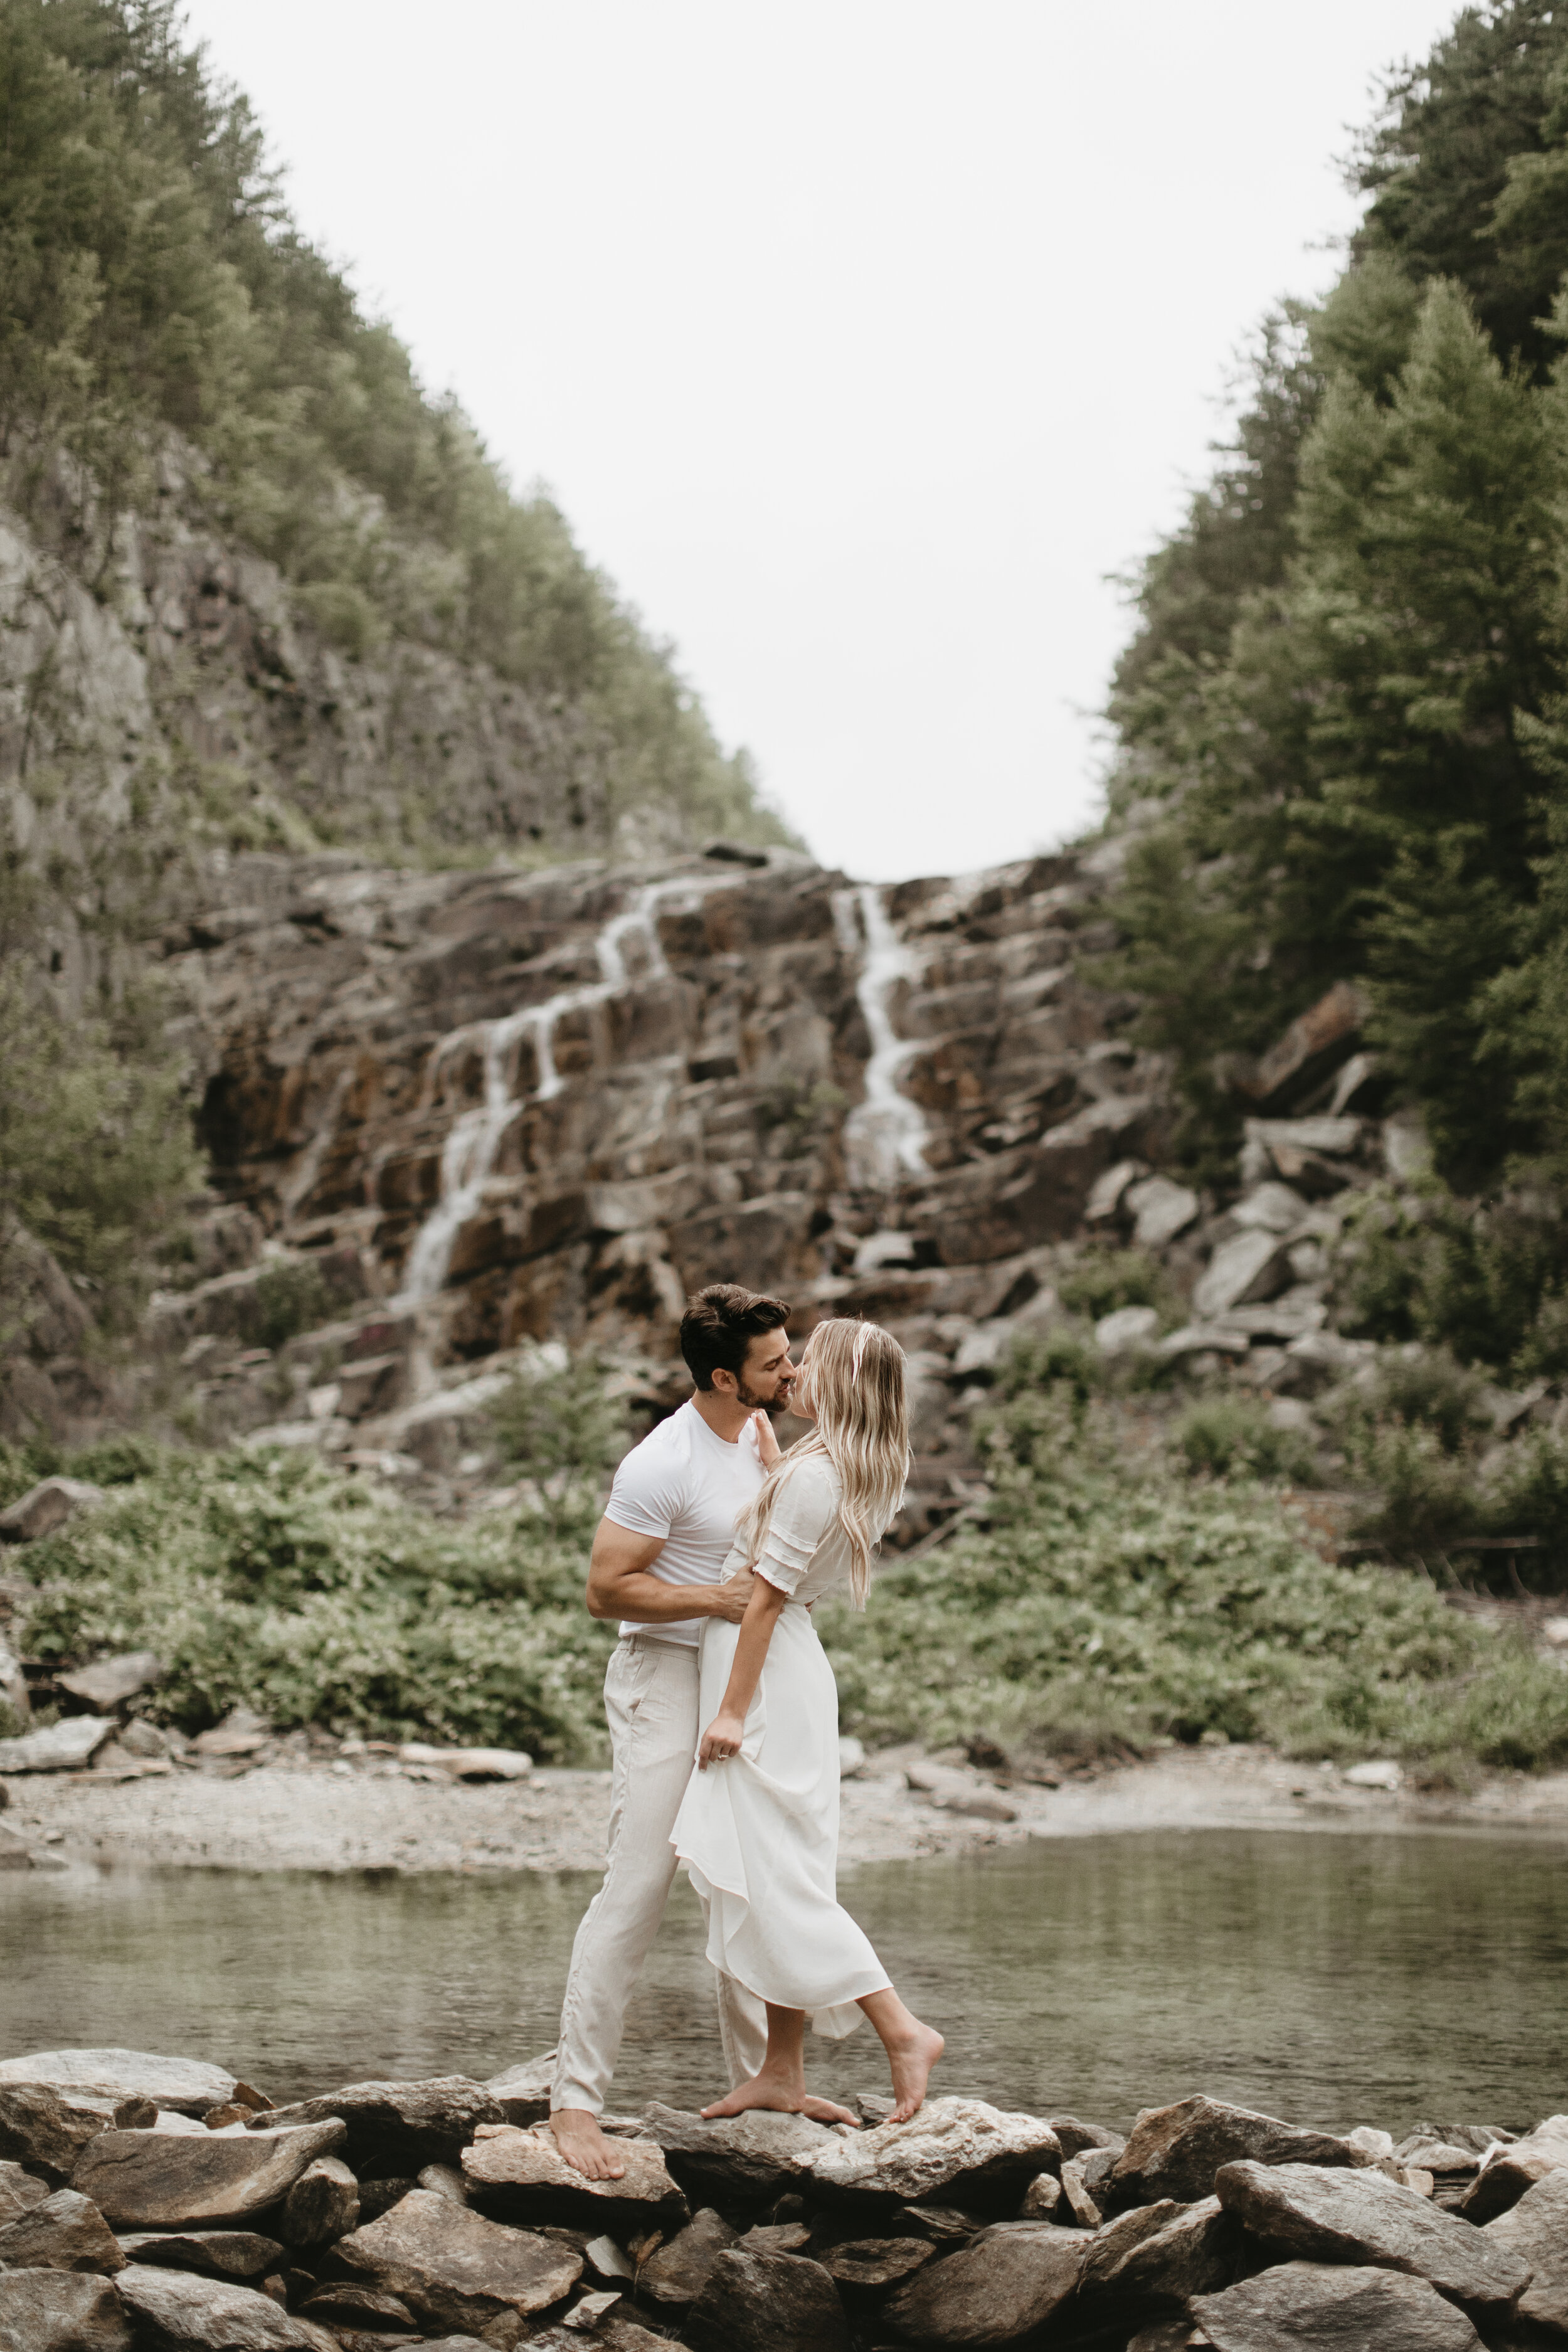 Nicole-Daacke-Photography-michaux-state-forest-elopement-adventure-engagement-session-pennsylvania-elopement-pa-elopement-photographer-gettysburg-photographer-state-park-elopement-engagement-session-pennsylvania-waterfall-164.jpg